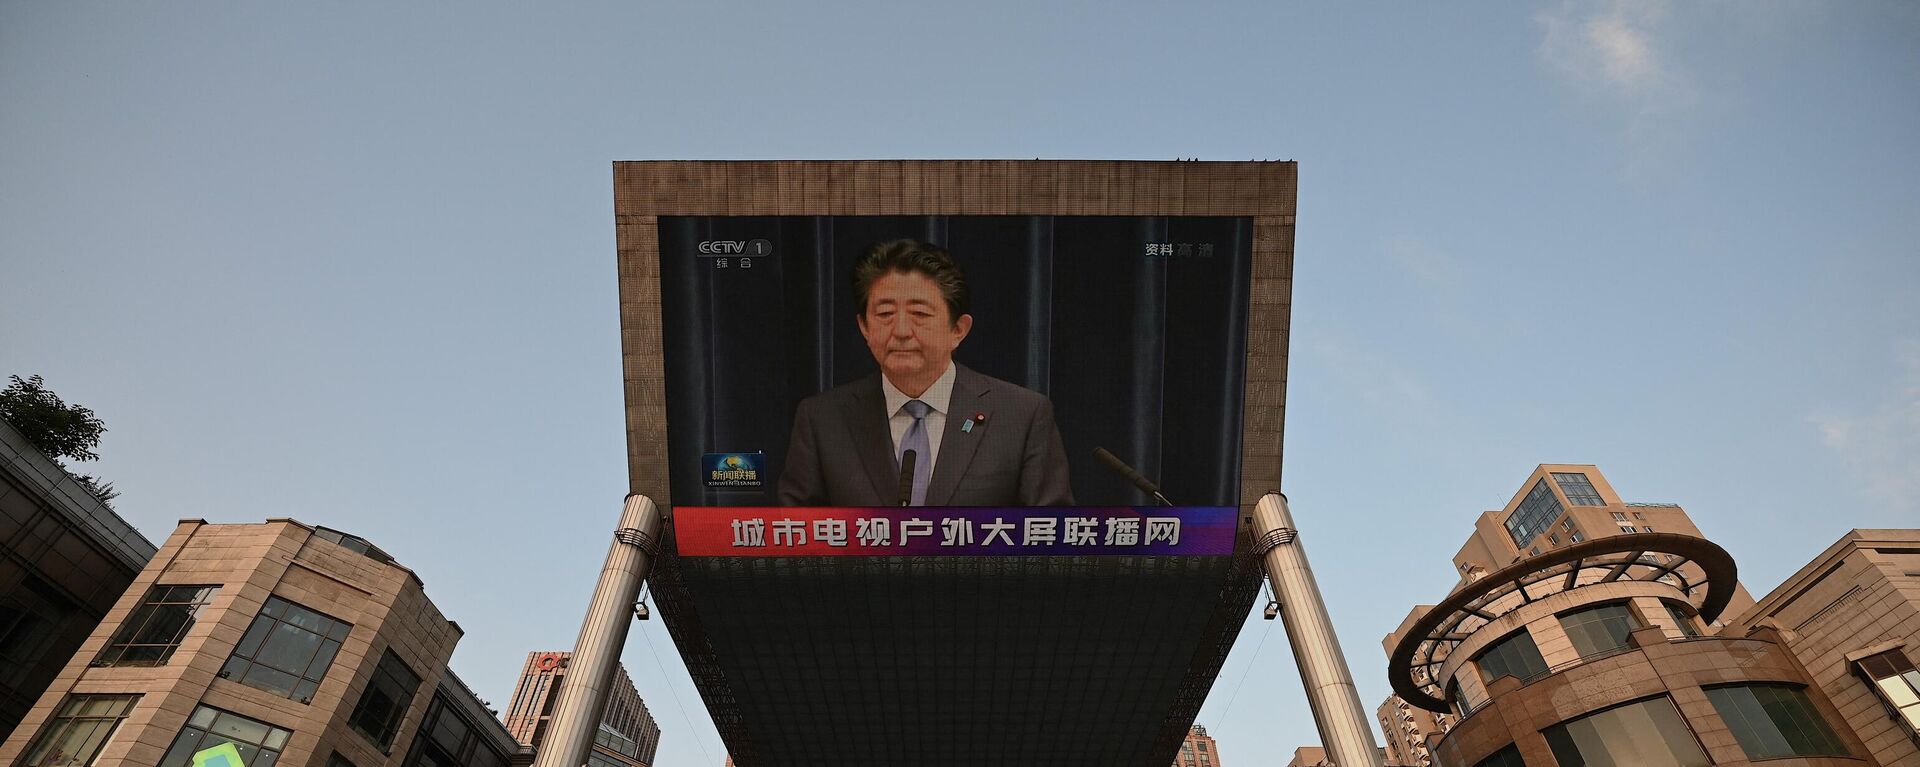 A large video screen shows news broadcast featuring an image of former Japanese prime minister Shinzo Abe in Beijing on July 8, 2022. - Sputnik International, 1920, 08.07.2022